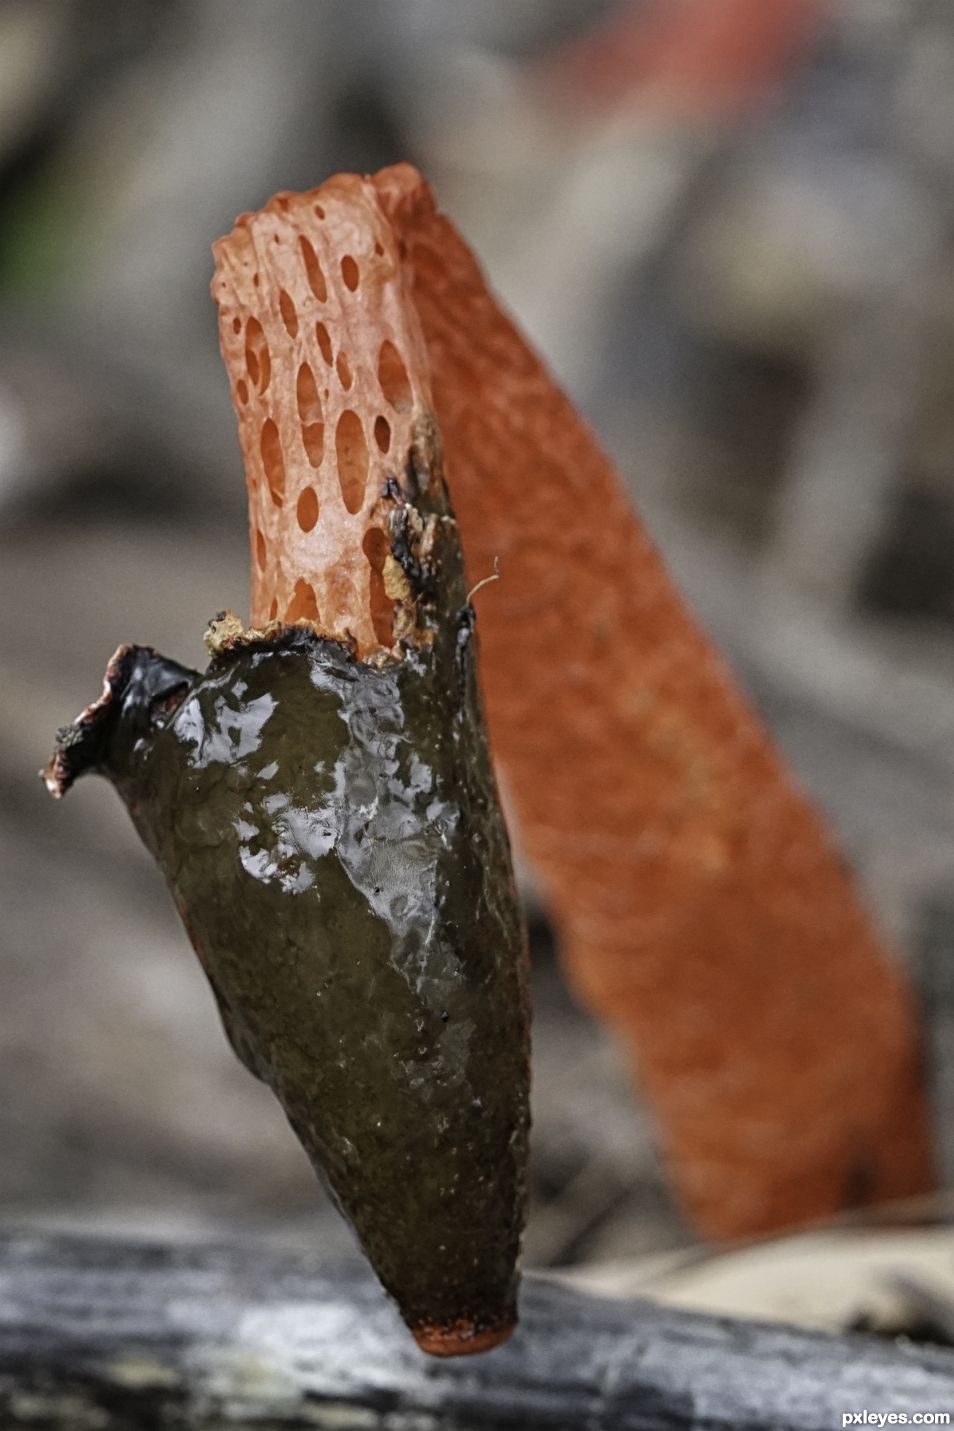 Demise of a stinkhorn